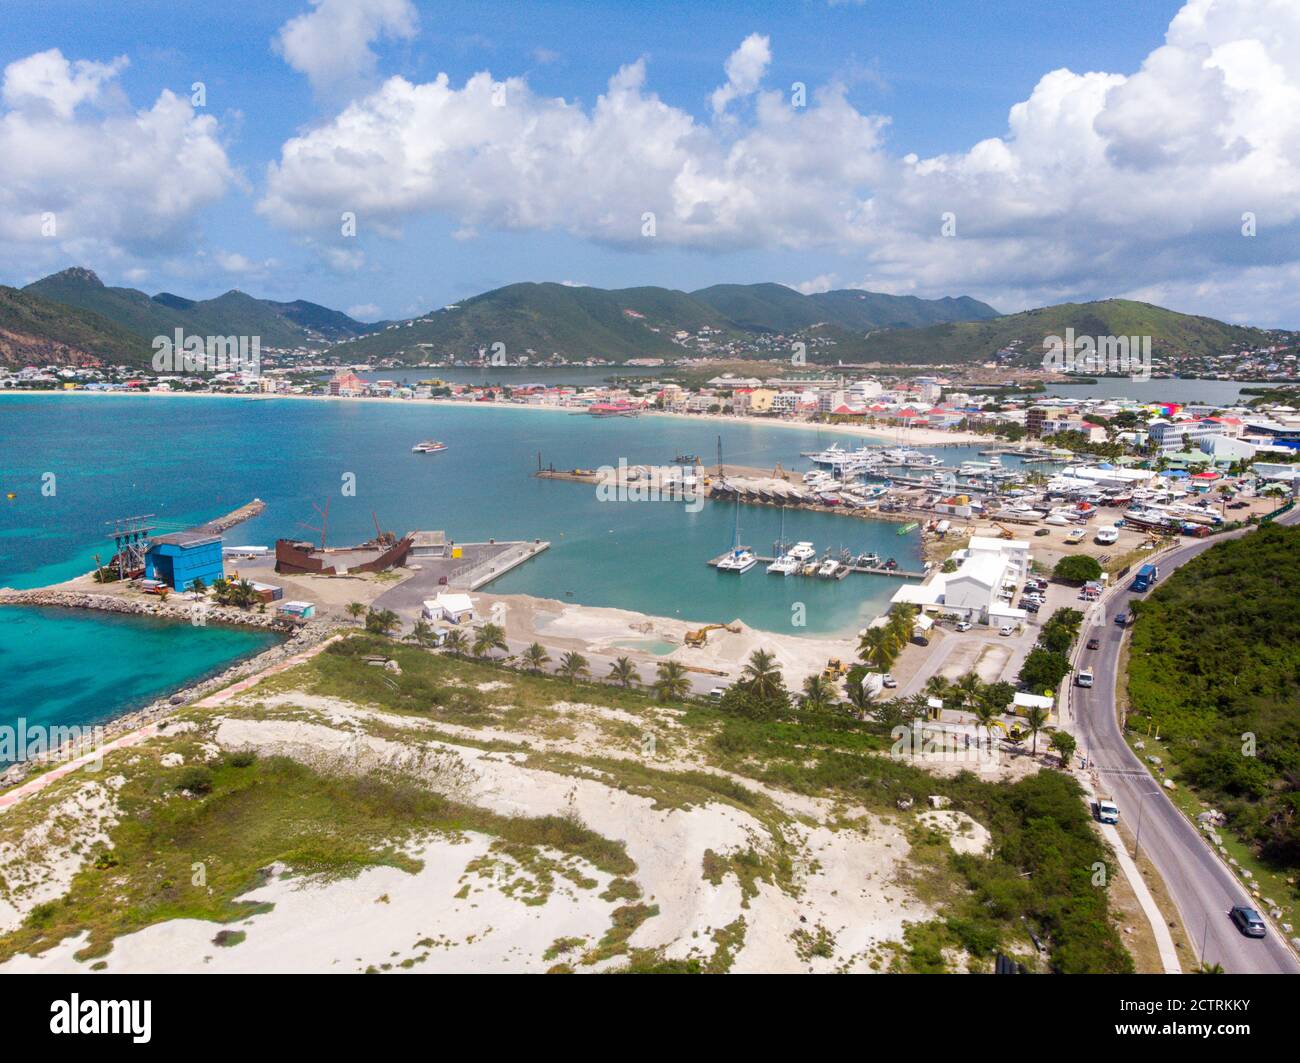 Aerial view of the Caribbean island of Sint maarten /Saint Martin. Aerial view of port st.maarten cruise facility. Stock Photo